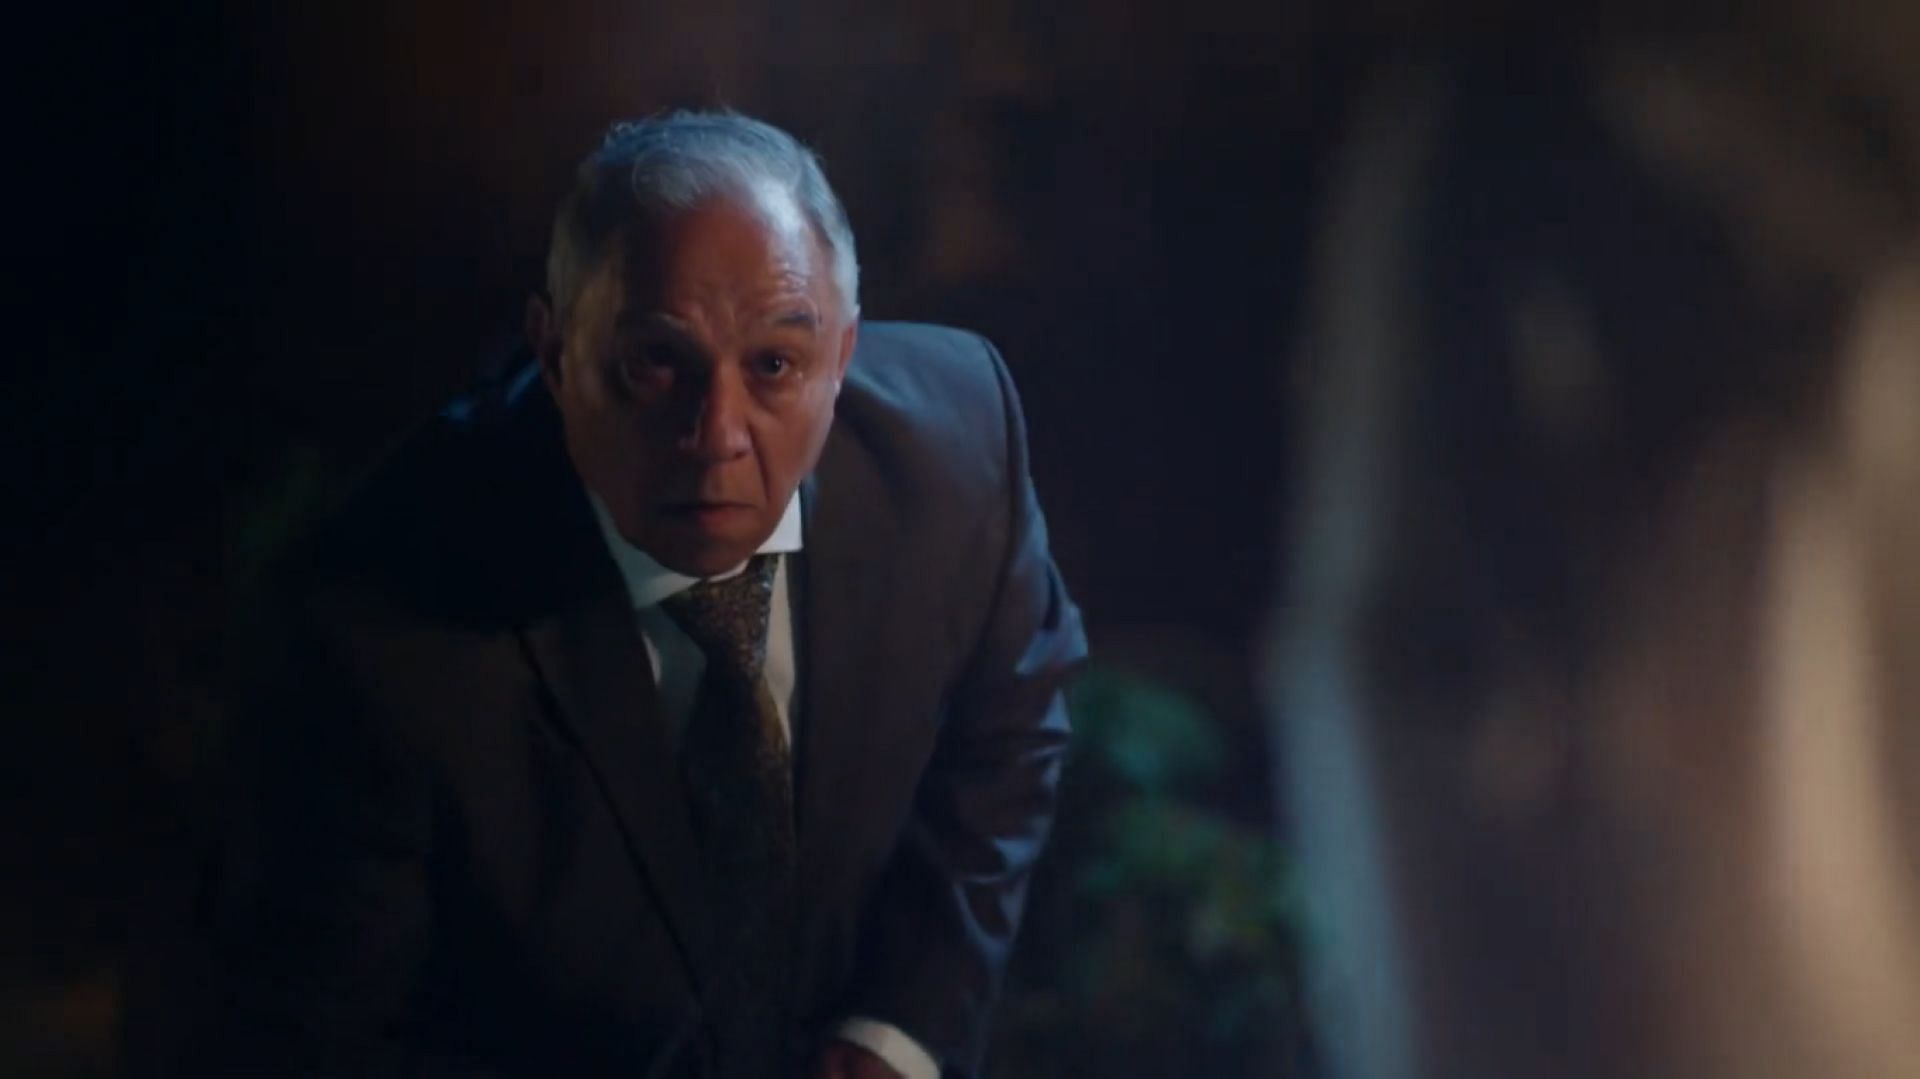 Georges Allaire was killed by Nadine Briseois in The Madame Blanc Mysteries season 3 episode 2 (Image via AcornTV)